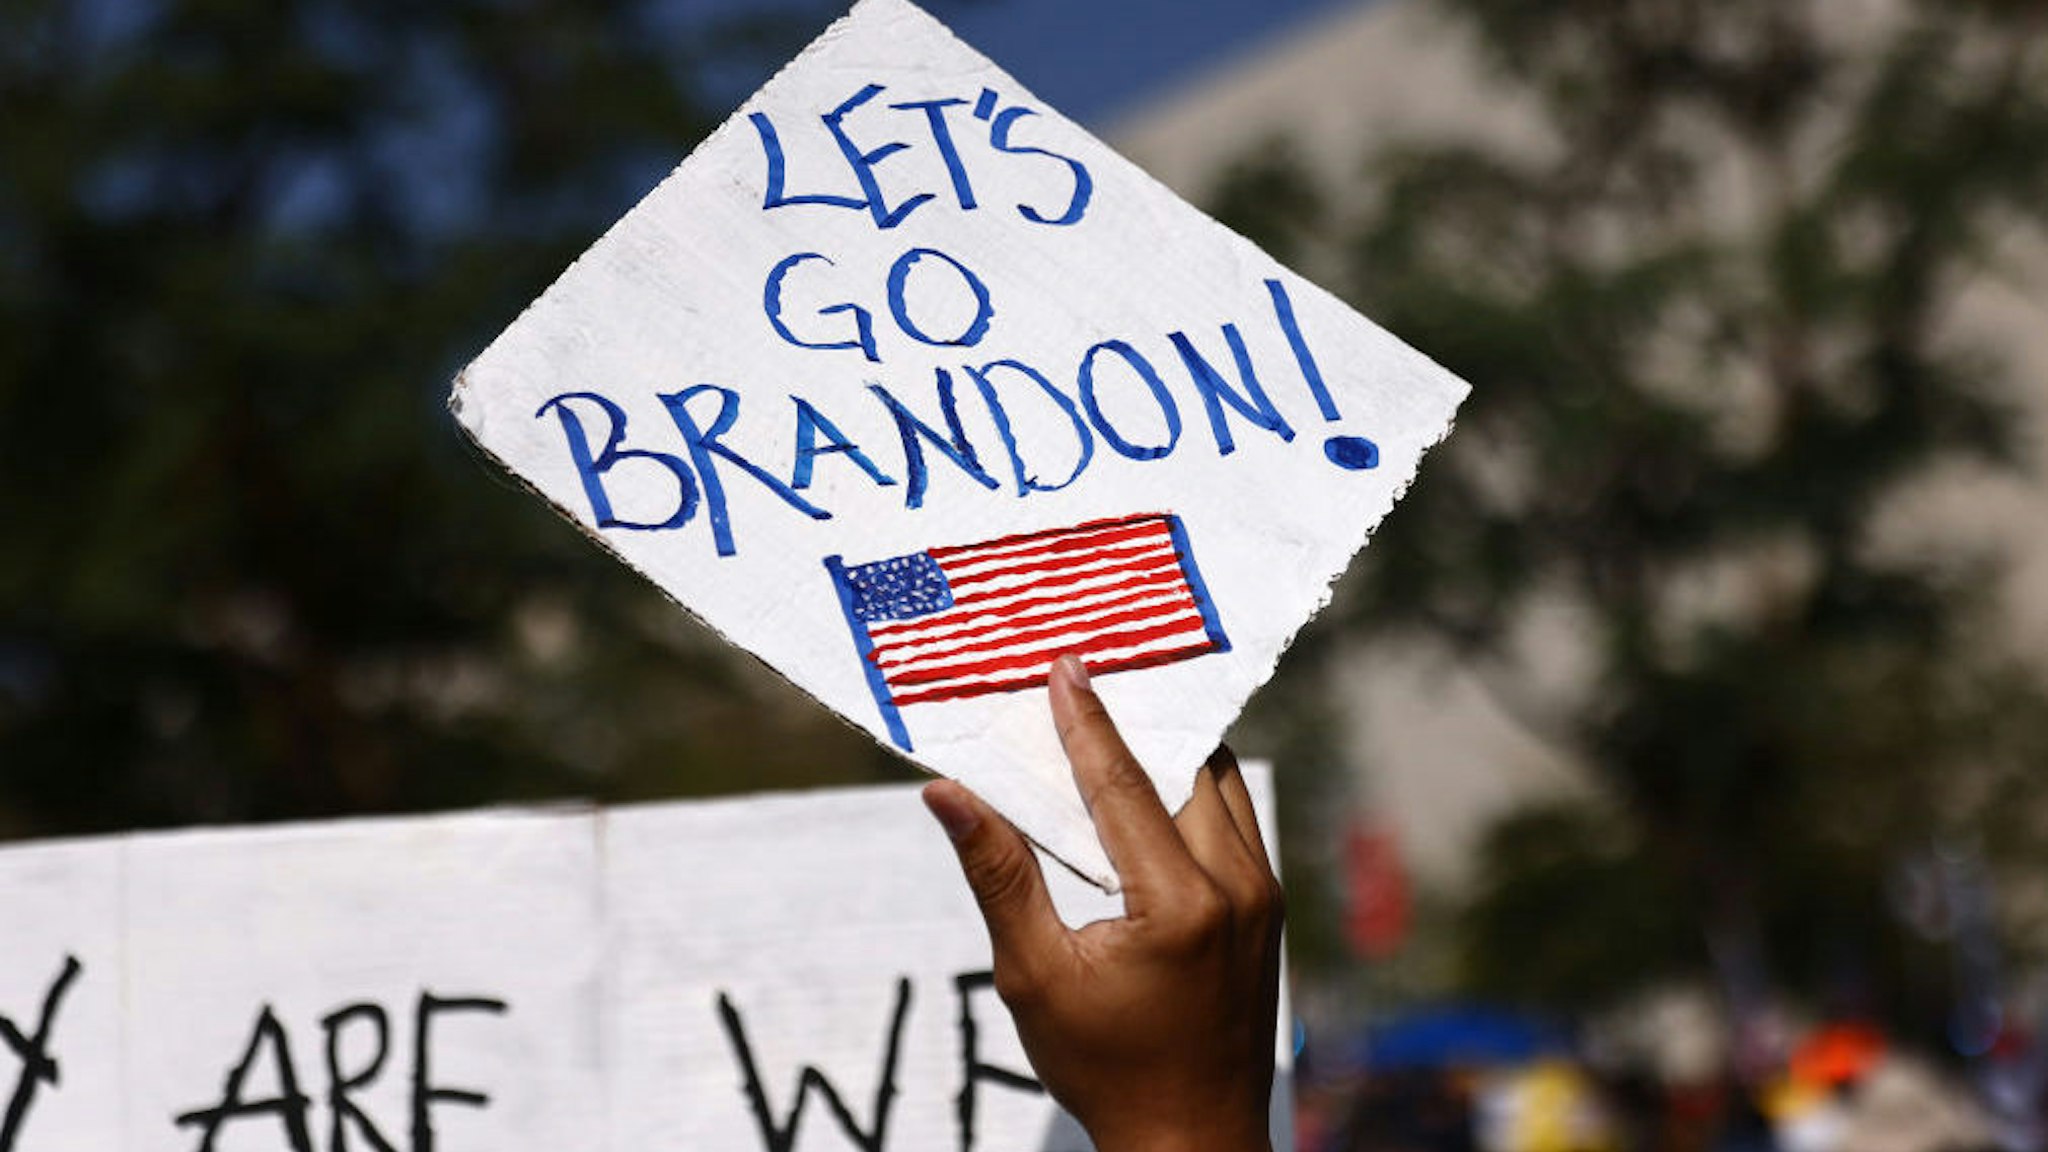 A protestor holds a 'Let's Go Brandon!' sign in Grand Park at a ‘March for Freedom’ rally demonstrating against the L.A. City Council’s COVID-19 vaccine mandate for city employees and contractors on November 8, 2021 in Los Angeles, California.